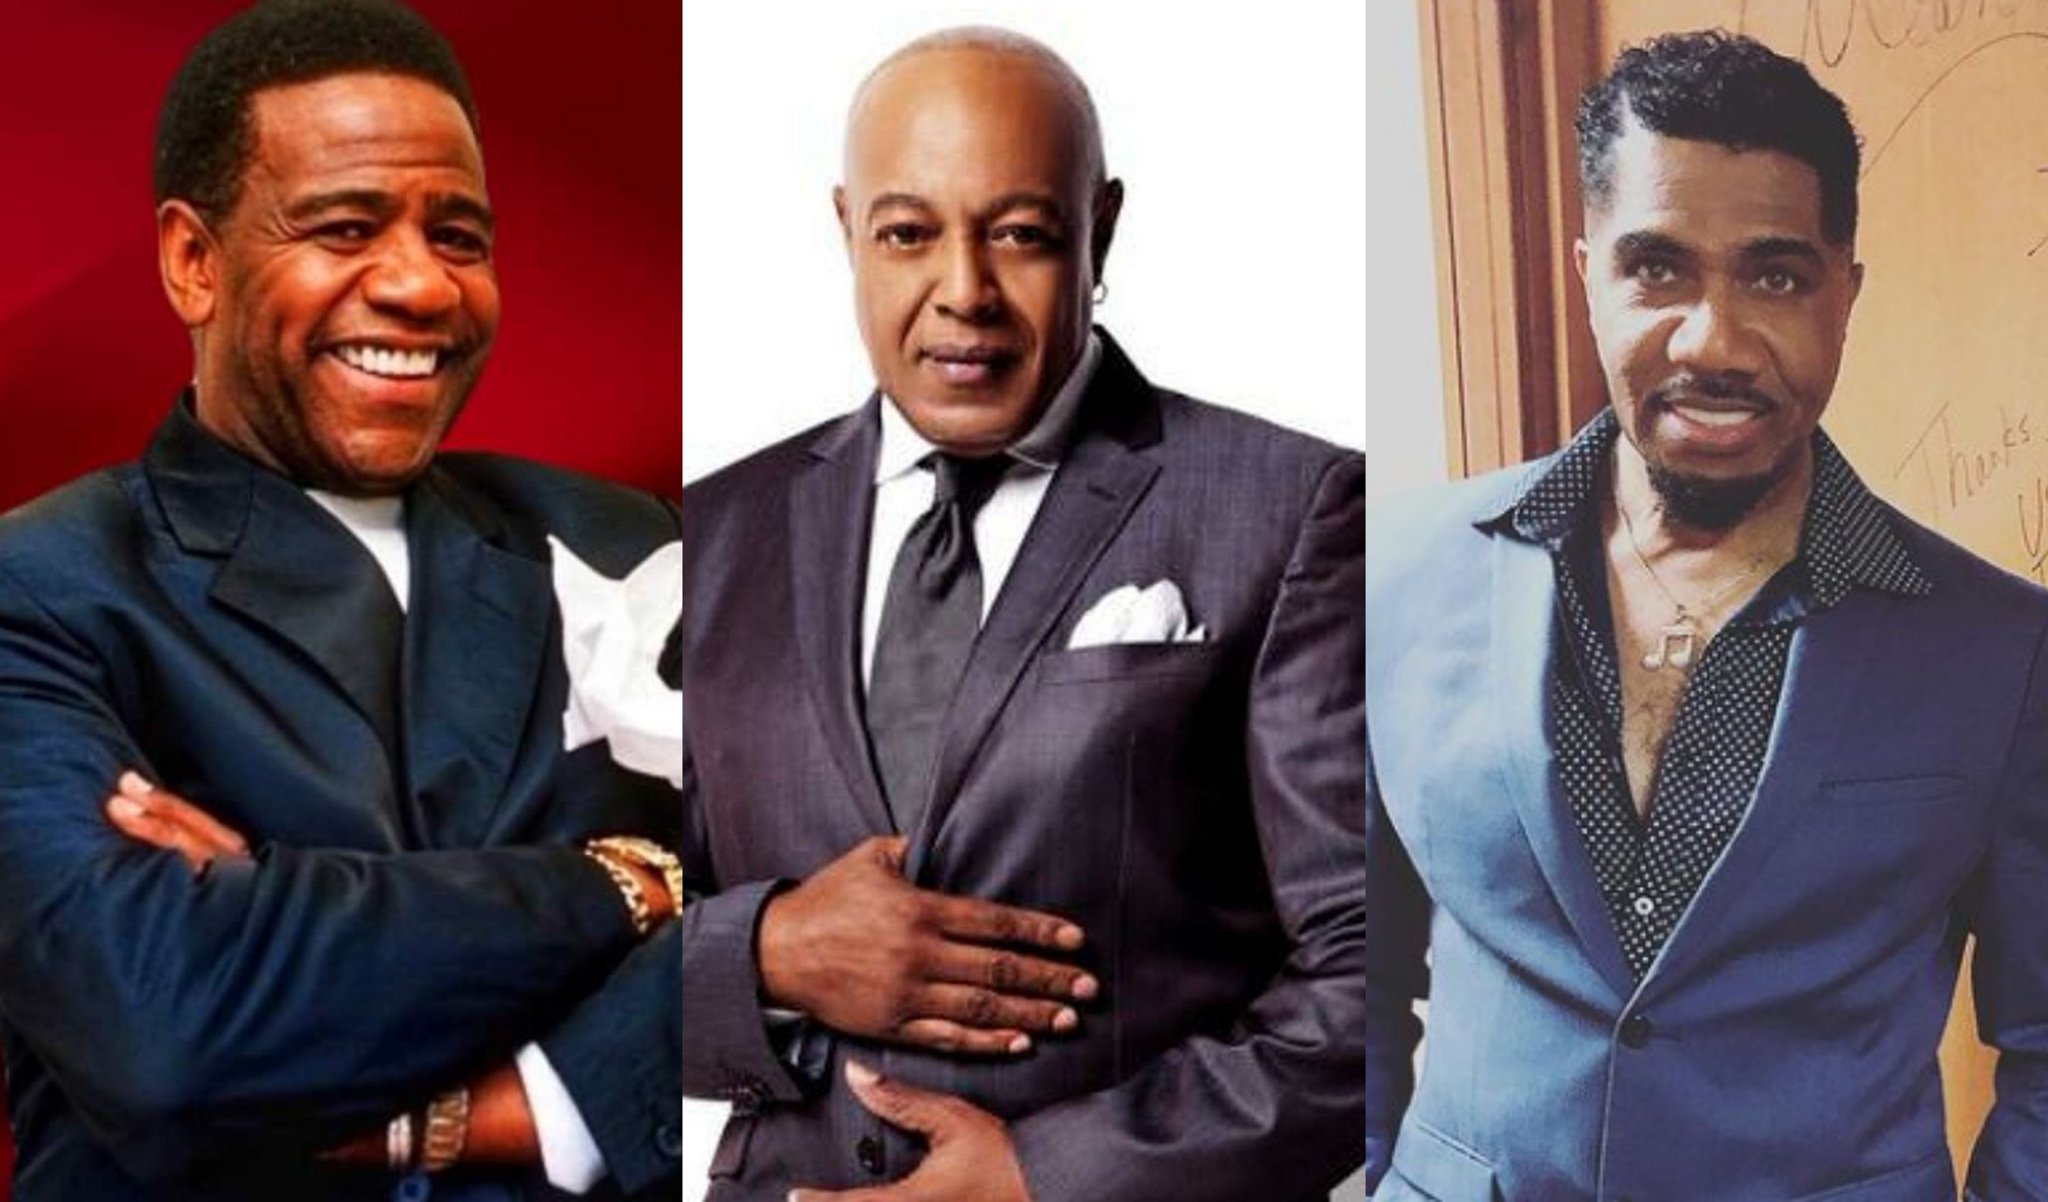 Happy Birthday shout-outs to three soul crooners! Al Green, Peabo Bryson and Wayne Lewis (of Atlantic Starr) 